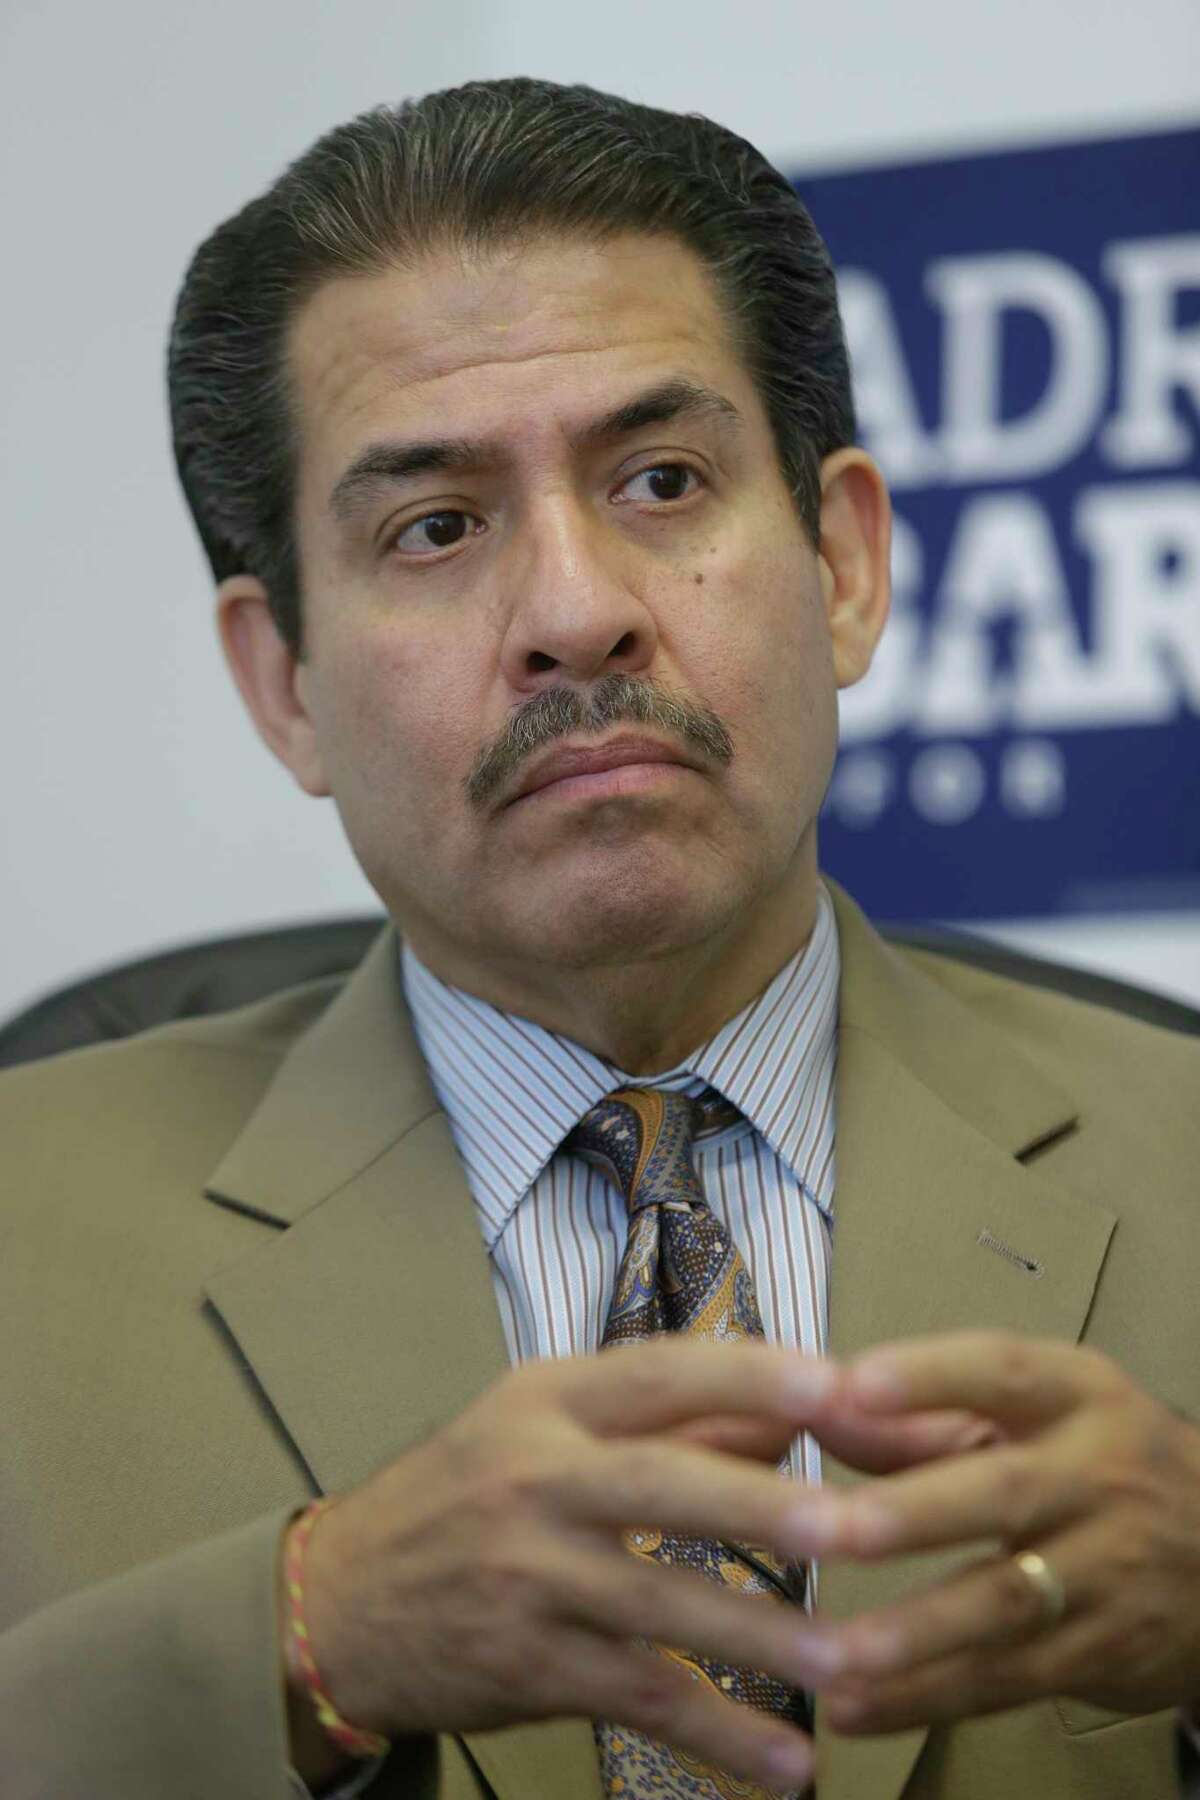 Former Harris County sheriff Adrian Garcia is a candidate for Harris County Commissioner, Precinct 2 (Chronicle file photo )